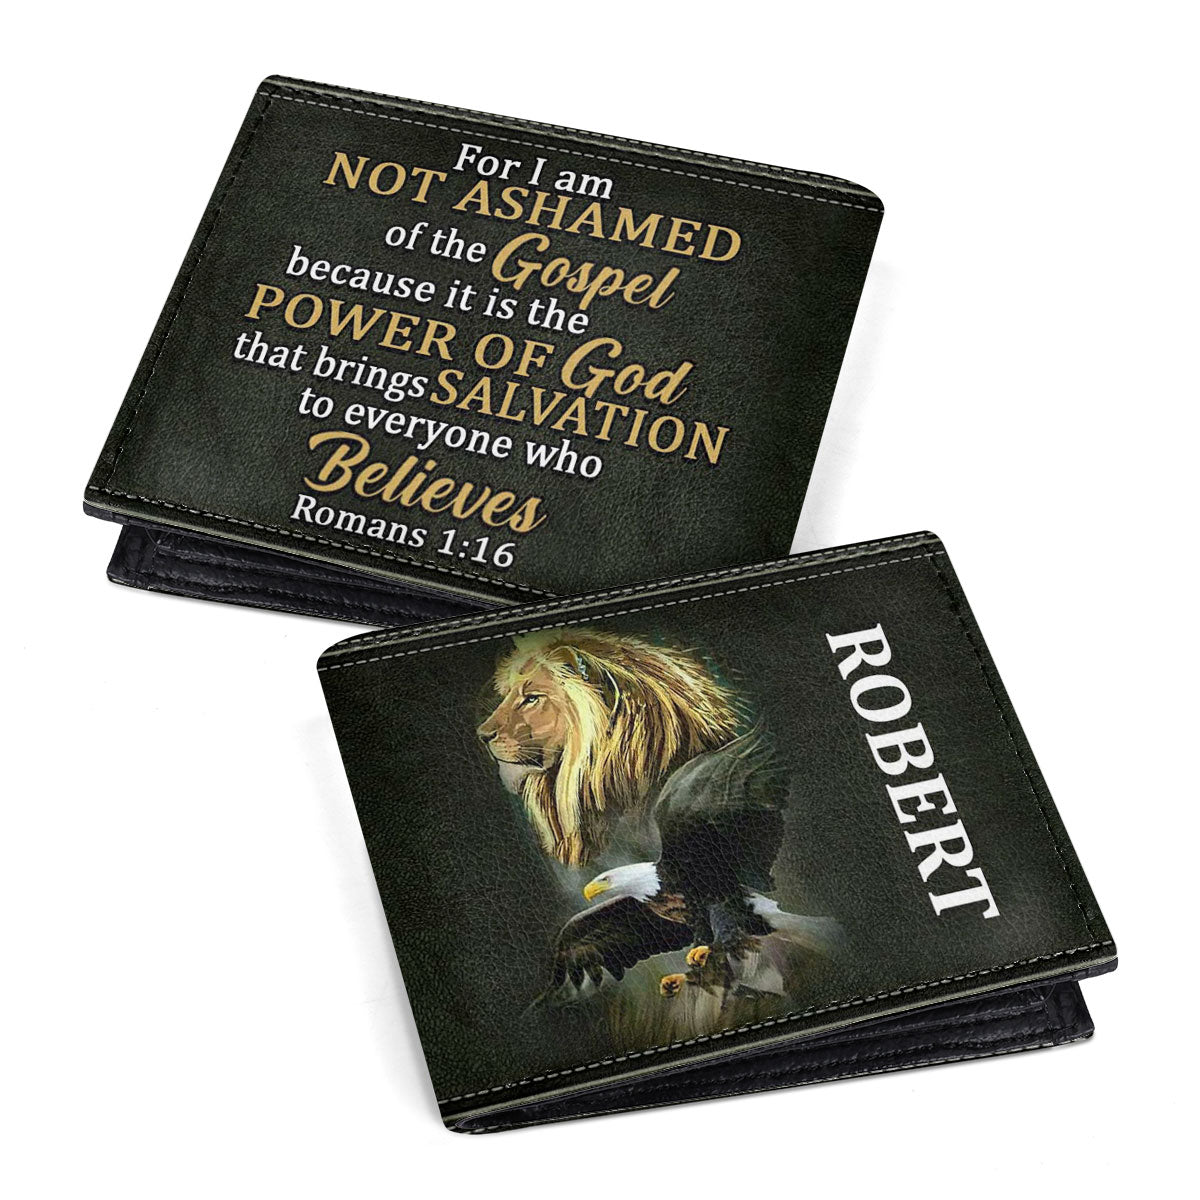 Not Ashamed Of The Gospel - Personalized Leather Folded Wallet SBLFWM1031